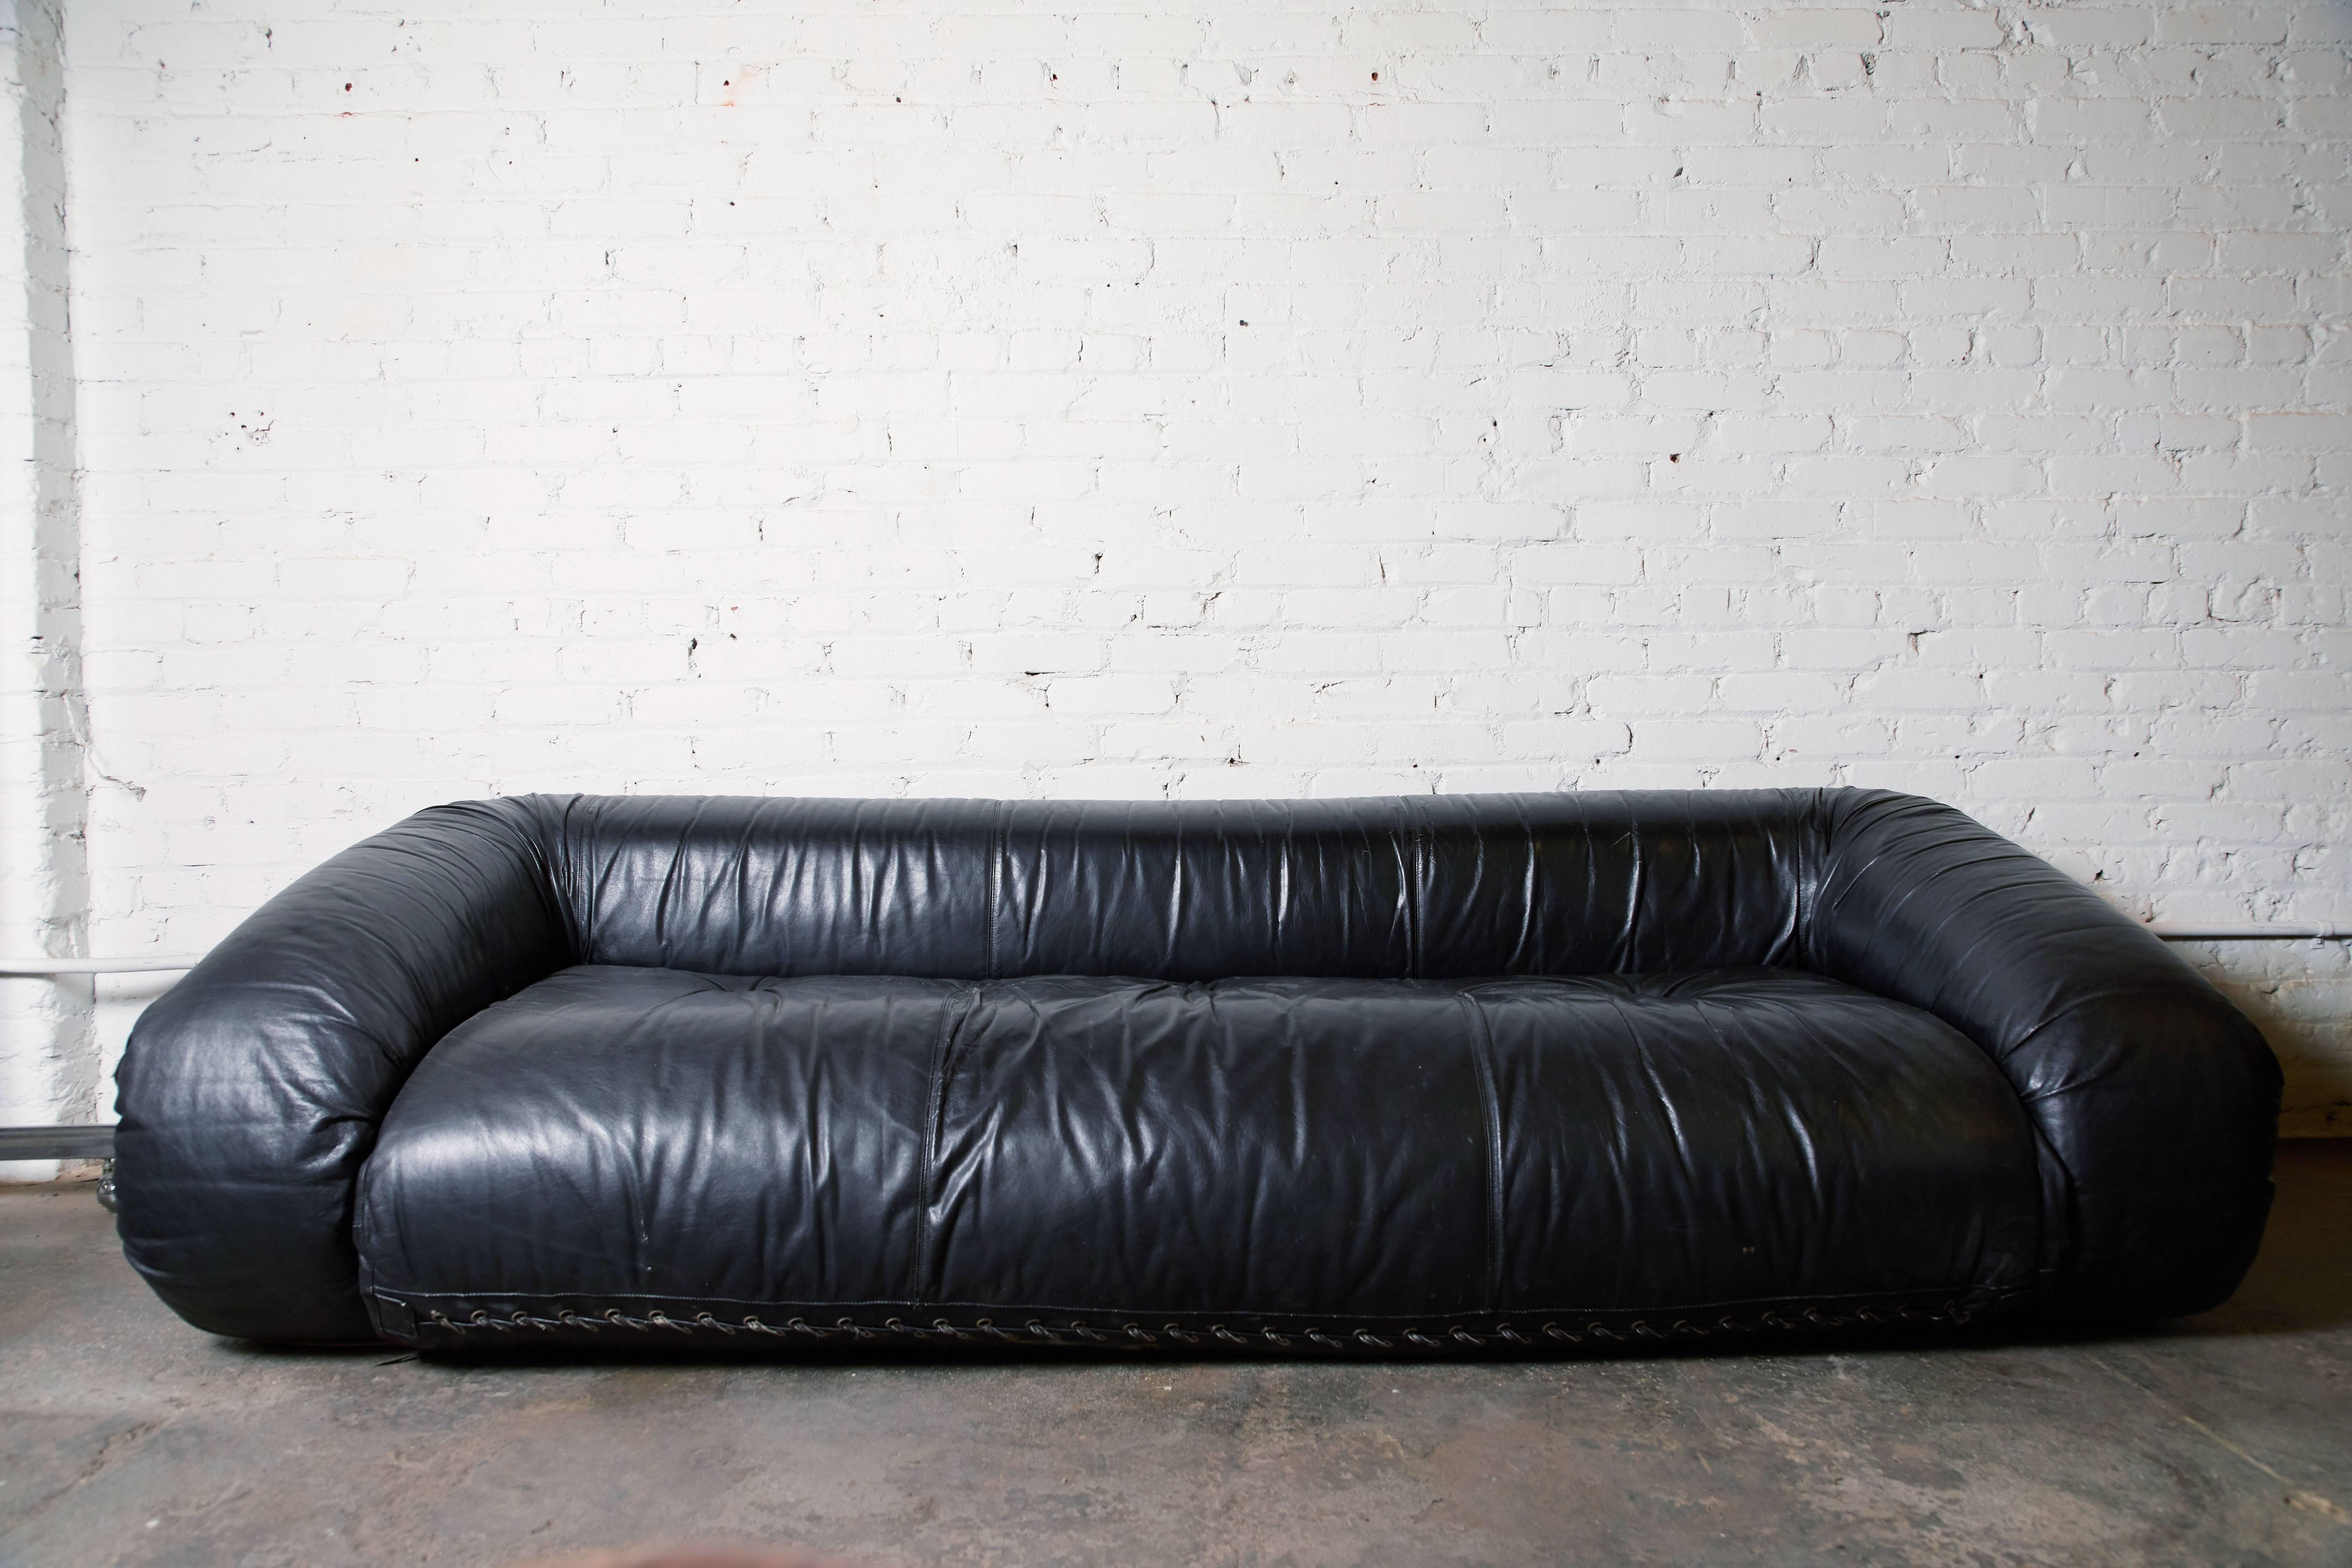 Iconic leather “Anfibio” convertible sofa bed by Alessandro Becchi for Giovannetti, circa 1970s. Bed with sheepskin cover measures approx. 91